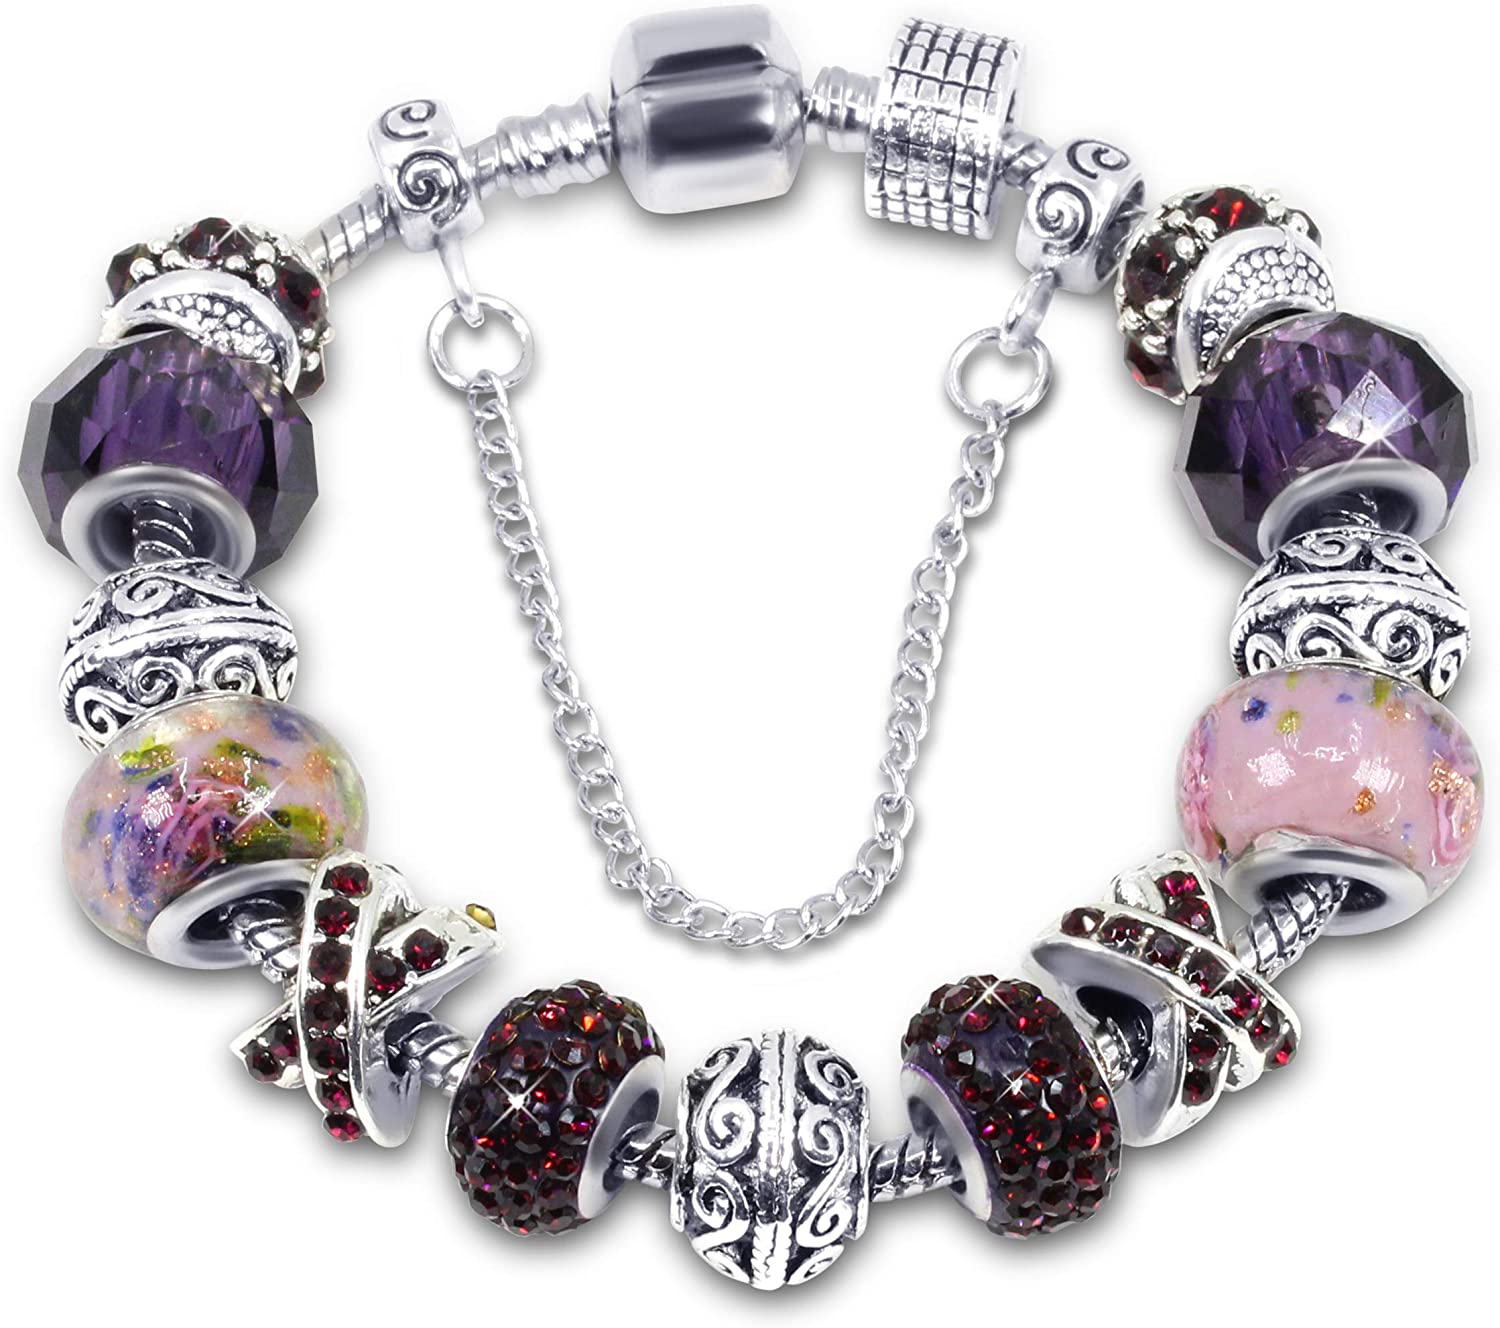 Savlano Silver Tone Charm Bracelet With Purple Crystal And Murano Glass  Beads Snake Chain For Women & Girls